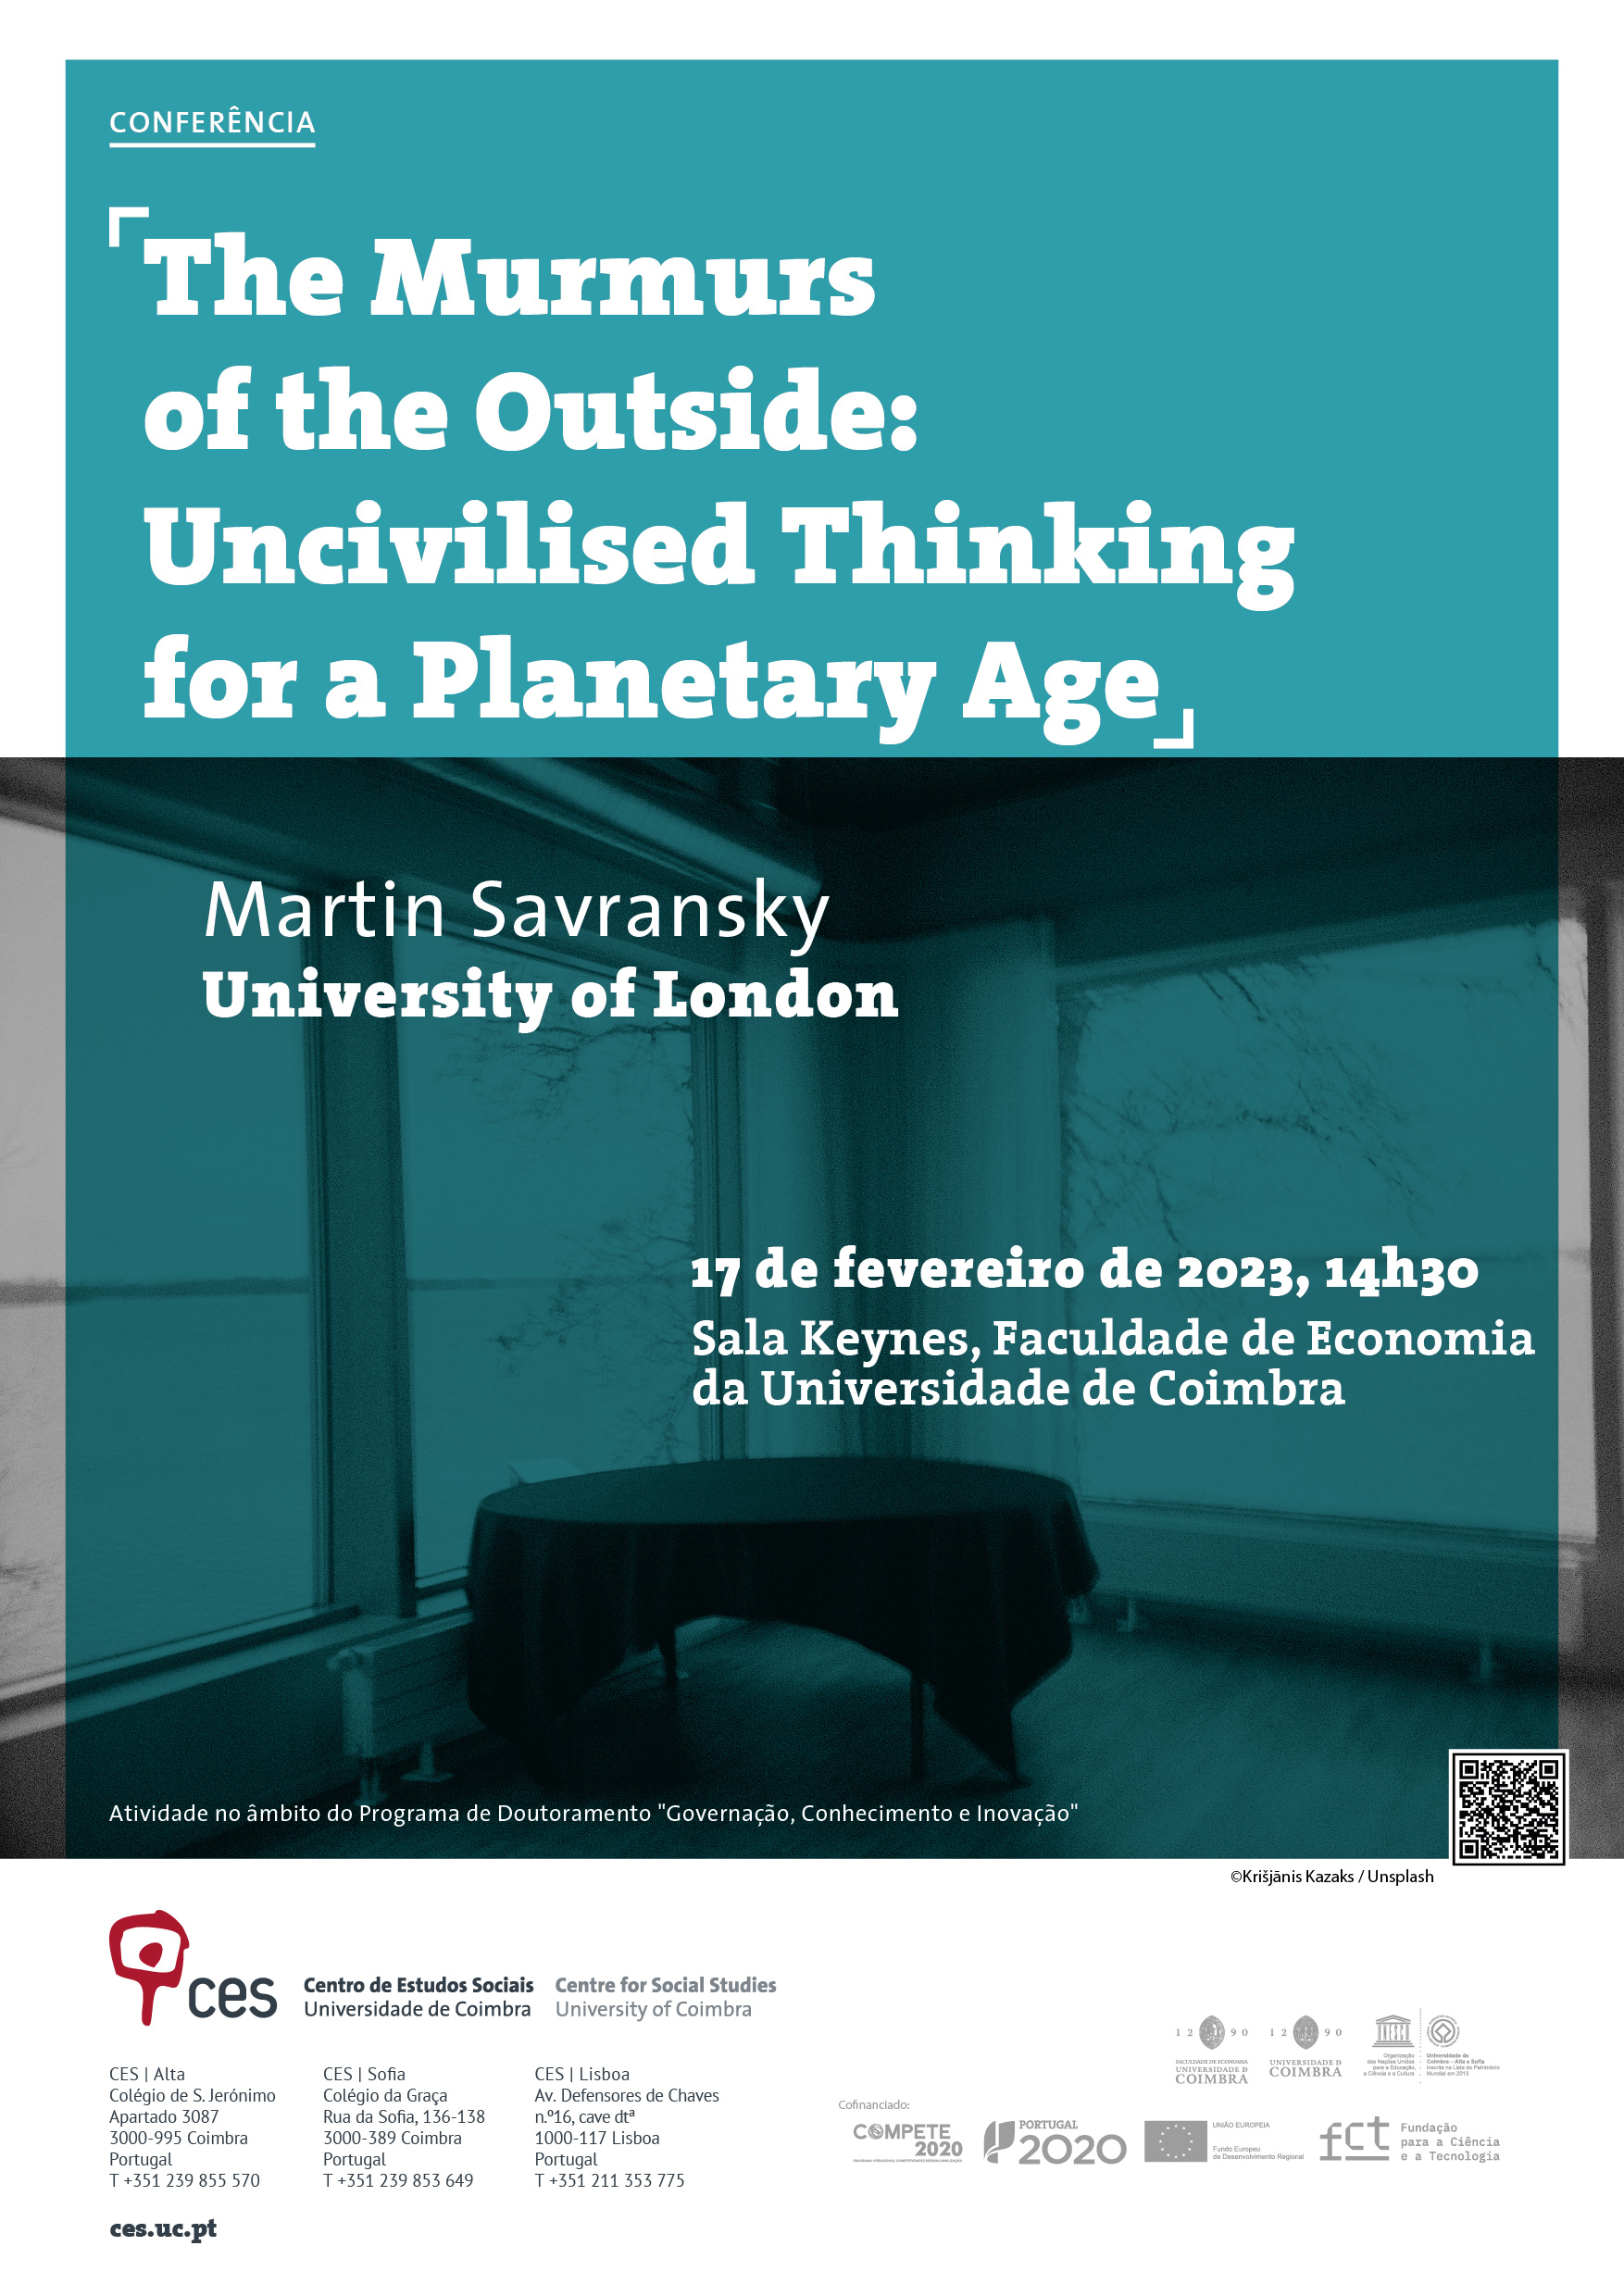 The Murmurs of the Outside: Uncivilised Thinking for a Planetary Age<span id="edit_41867"><script>$(function() { $('#edit_41867').load( "/myces/user/editobj.php?tipo=evento&id=41867" ); });</script></span>